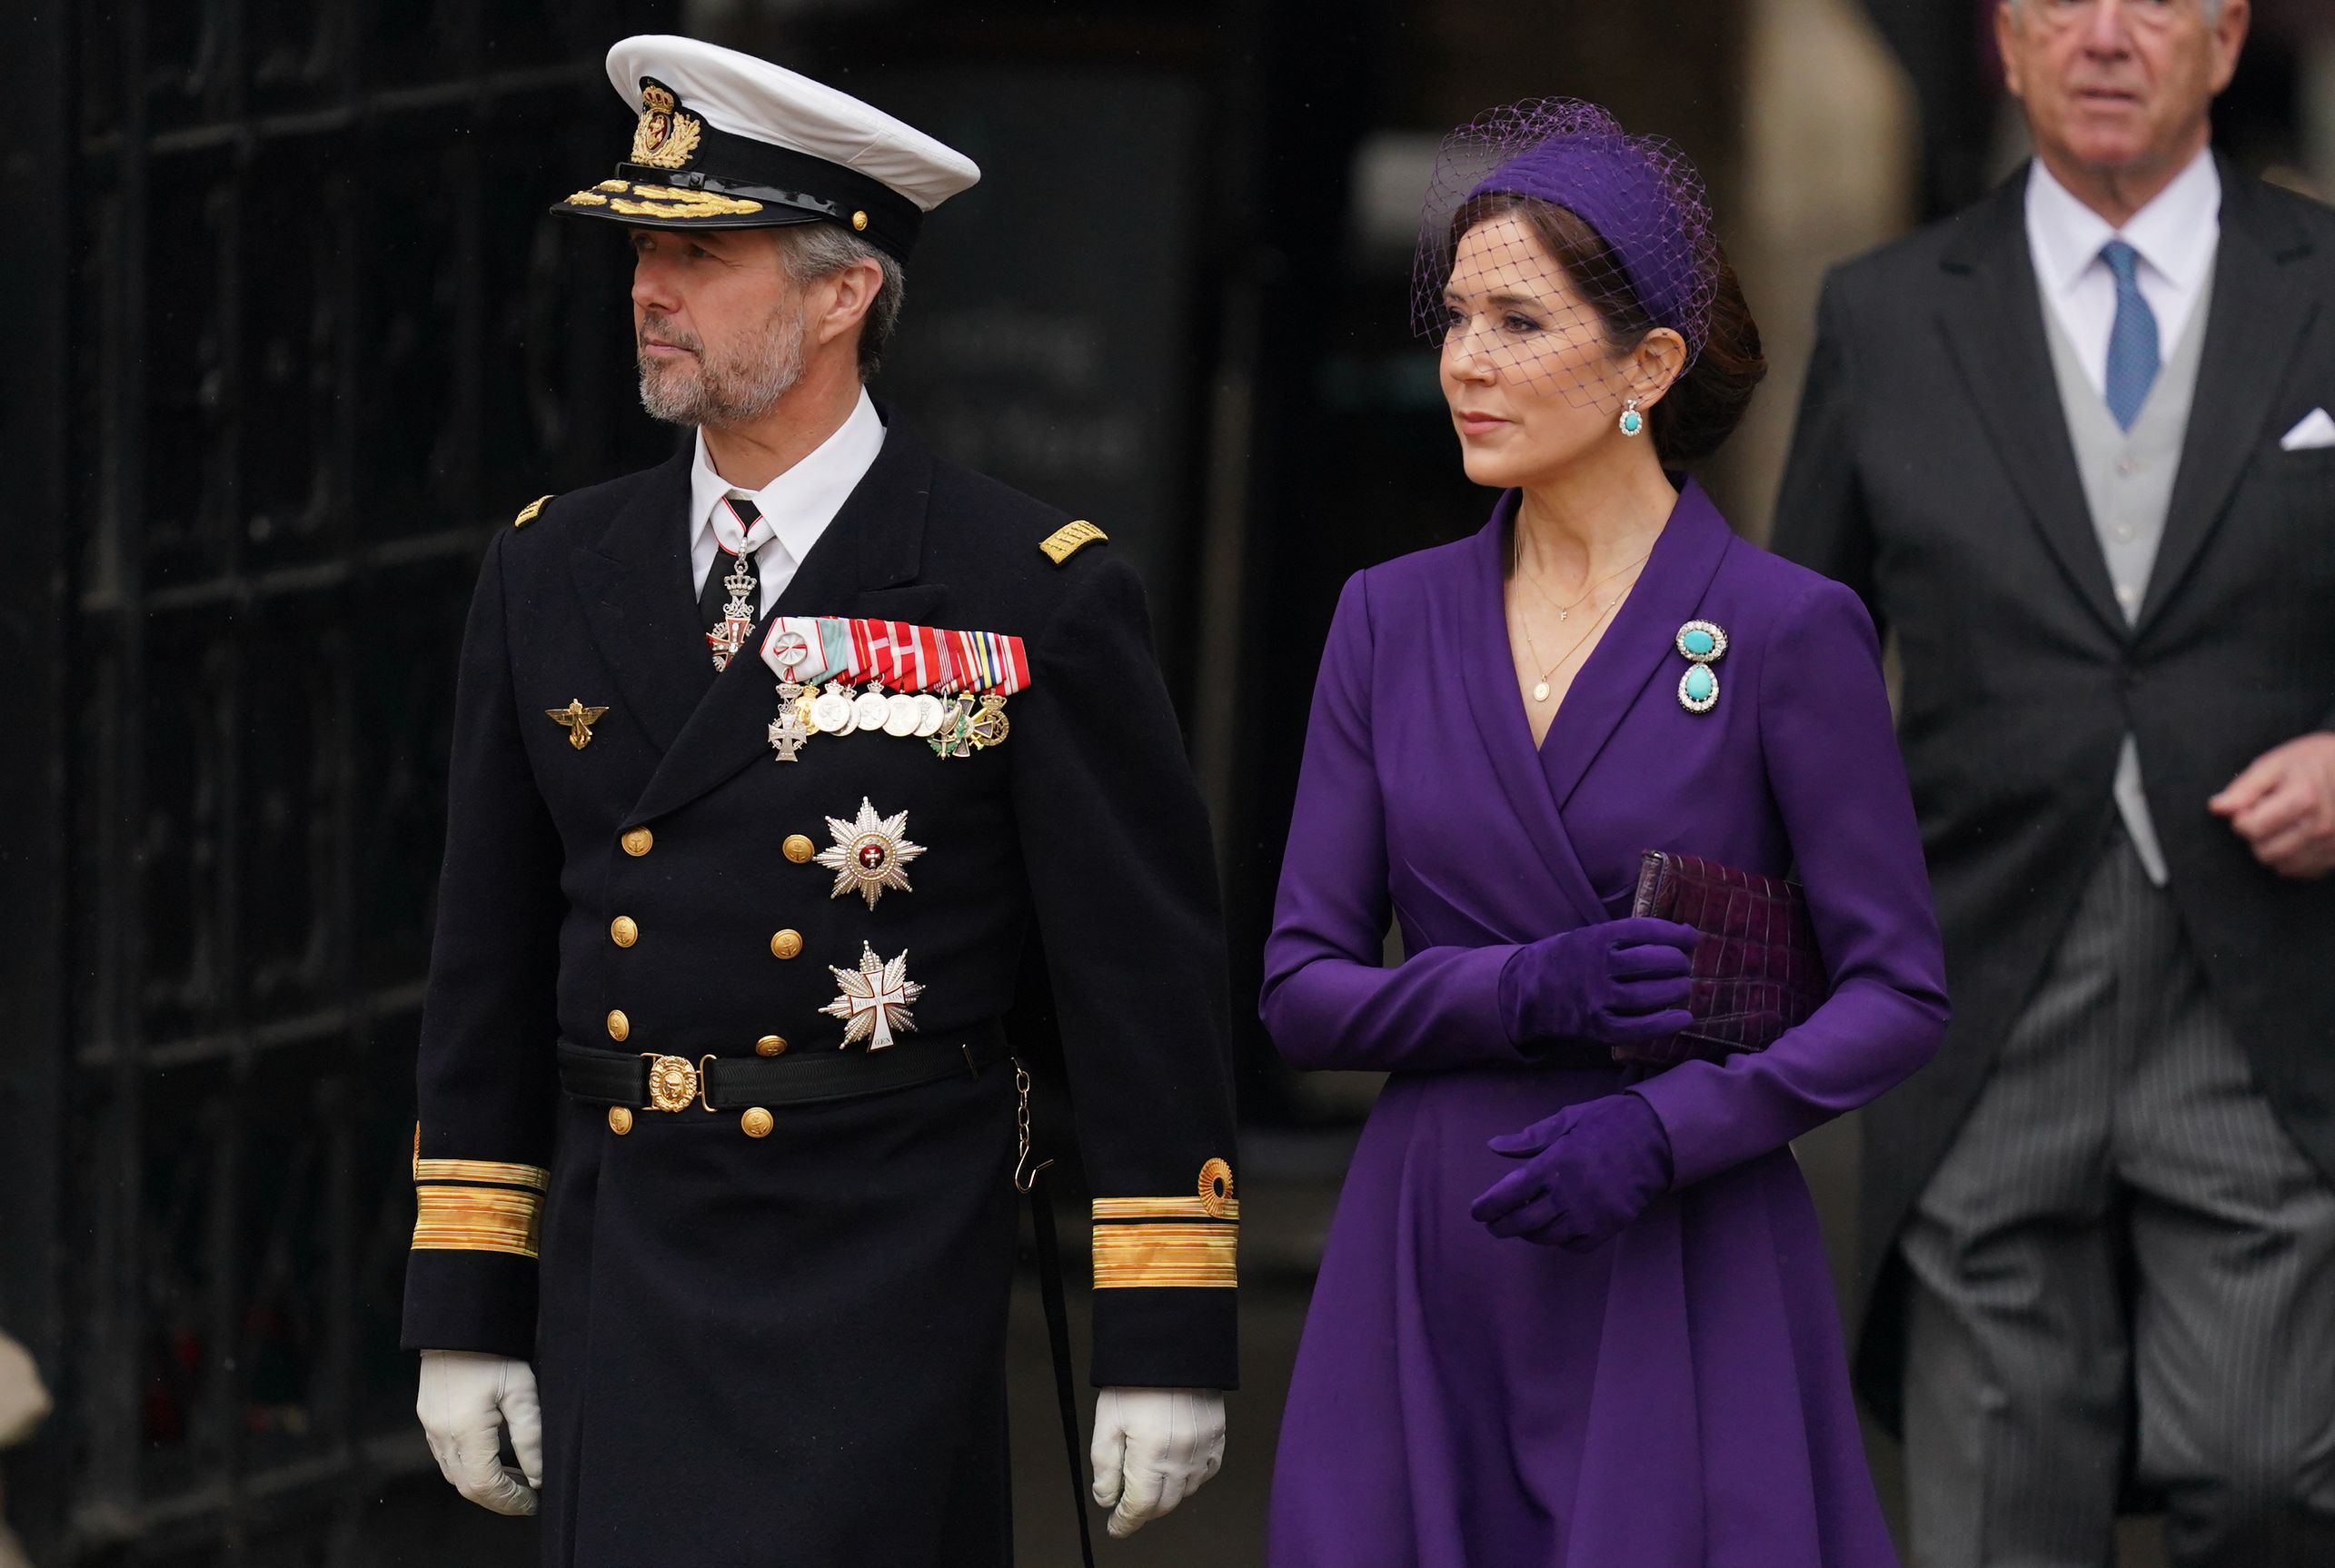 Princess Mary of Denmark Stuns in a Regal Purple Outfit at King Charles's  Coronation - See Photos